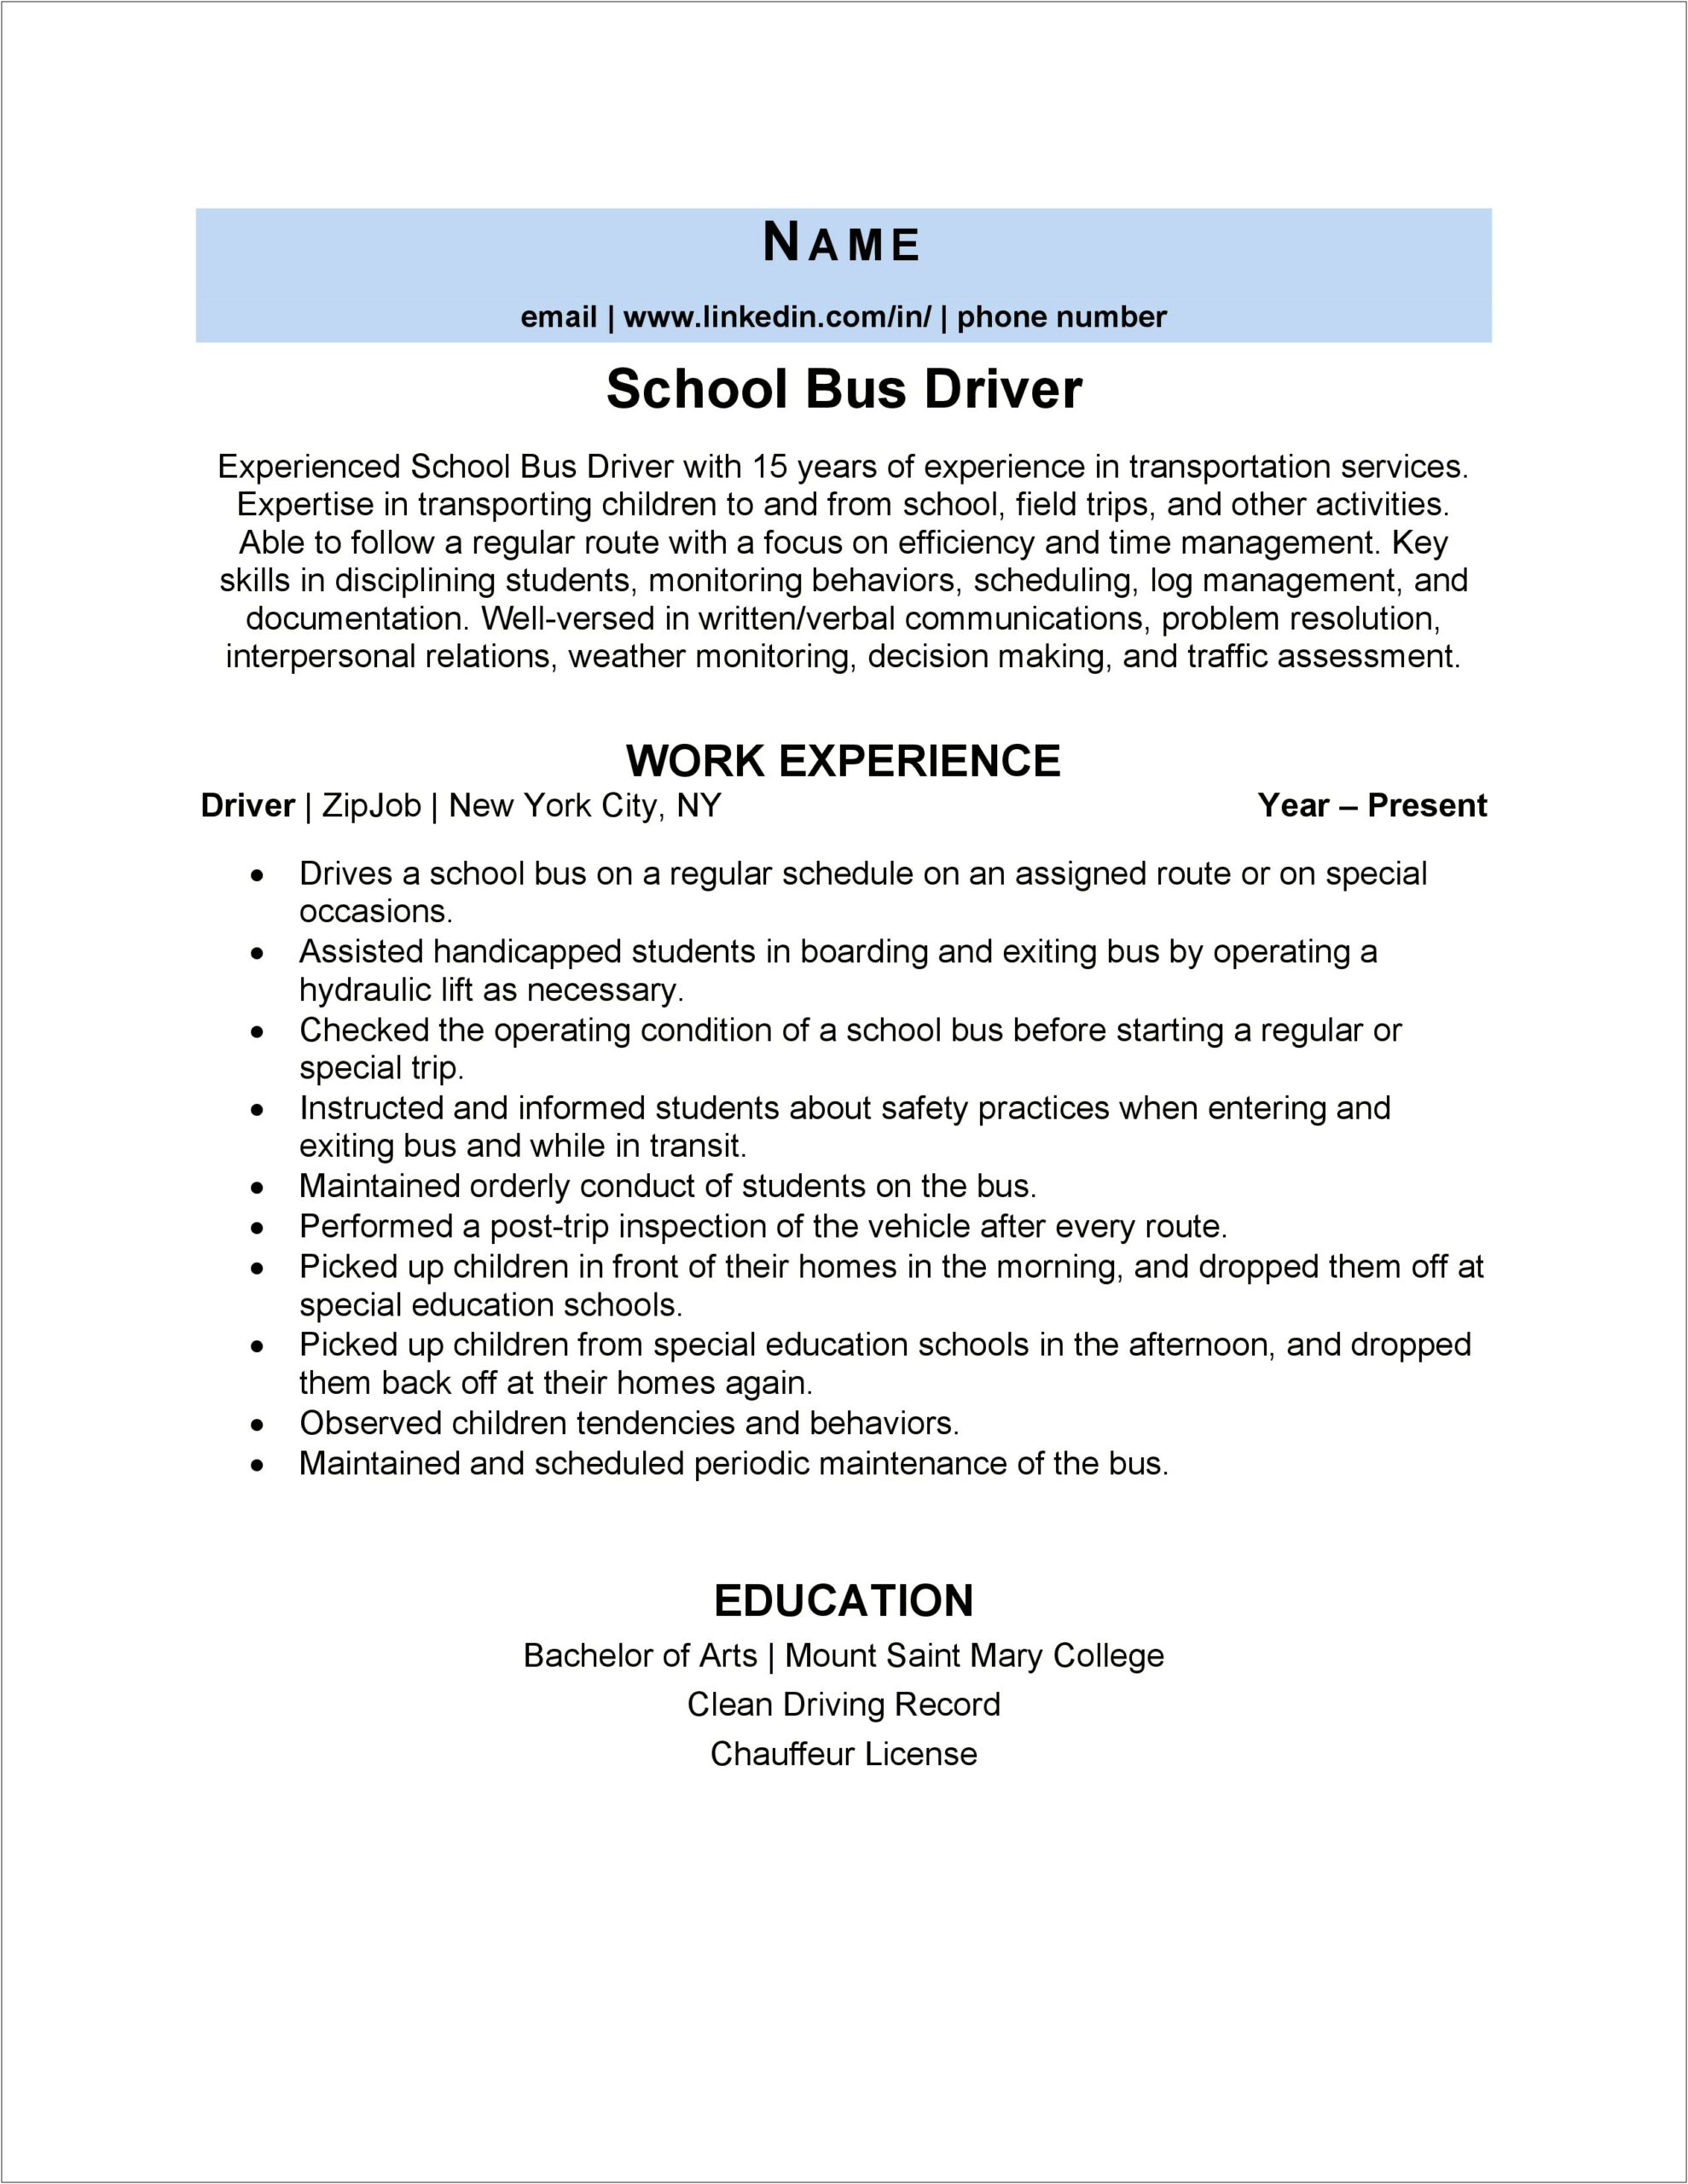 Using Field Trip Experience On A Resume